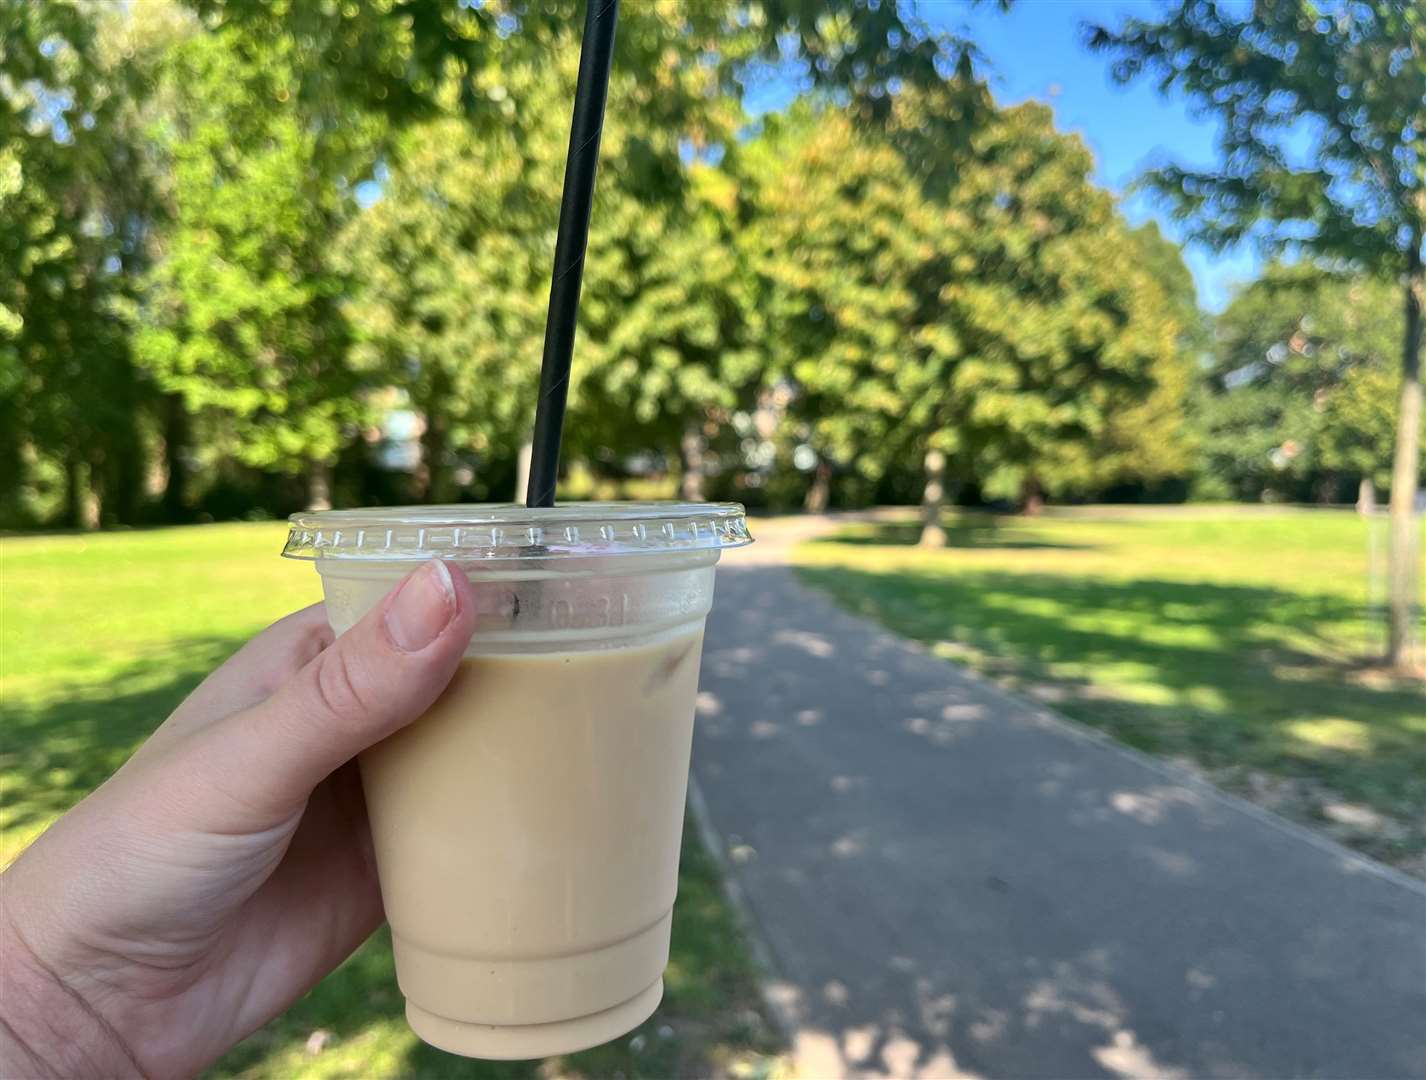 An iced latte from the cafe on this warm afternoon was delightful